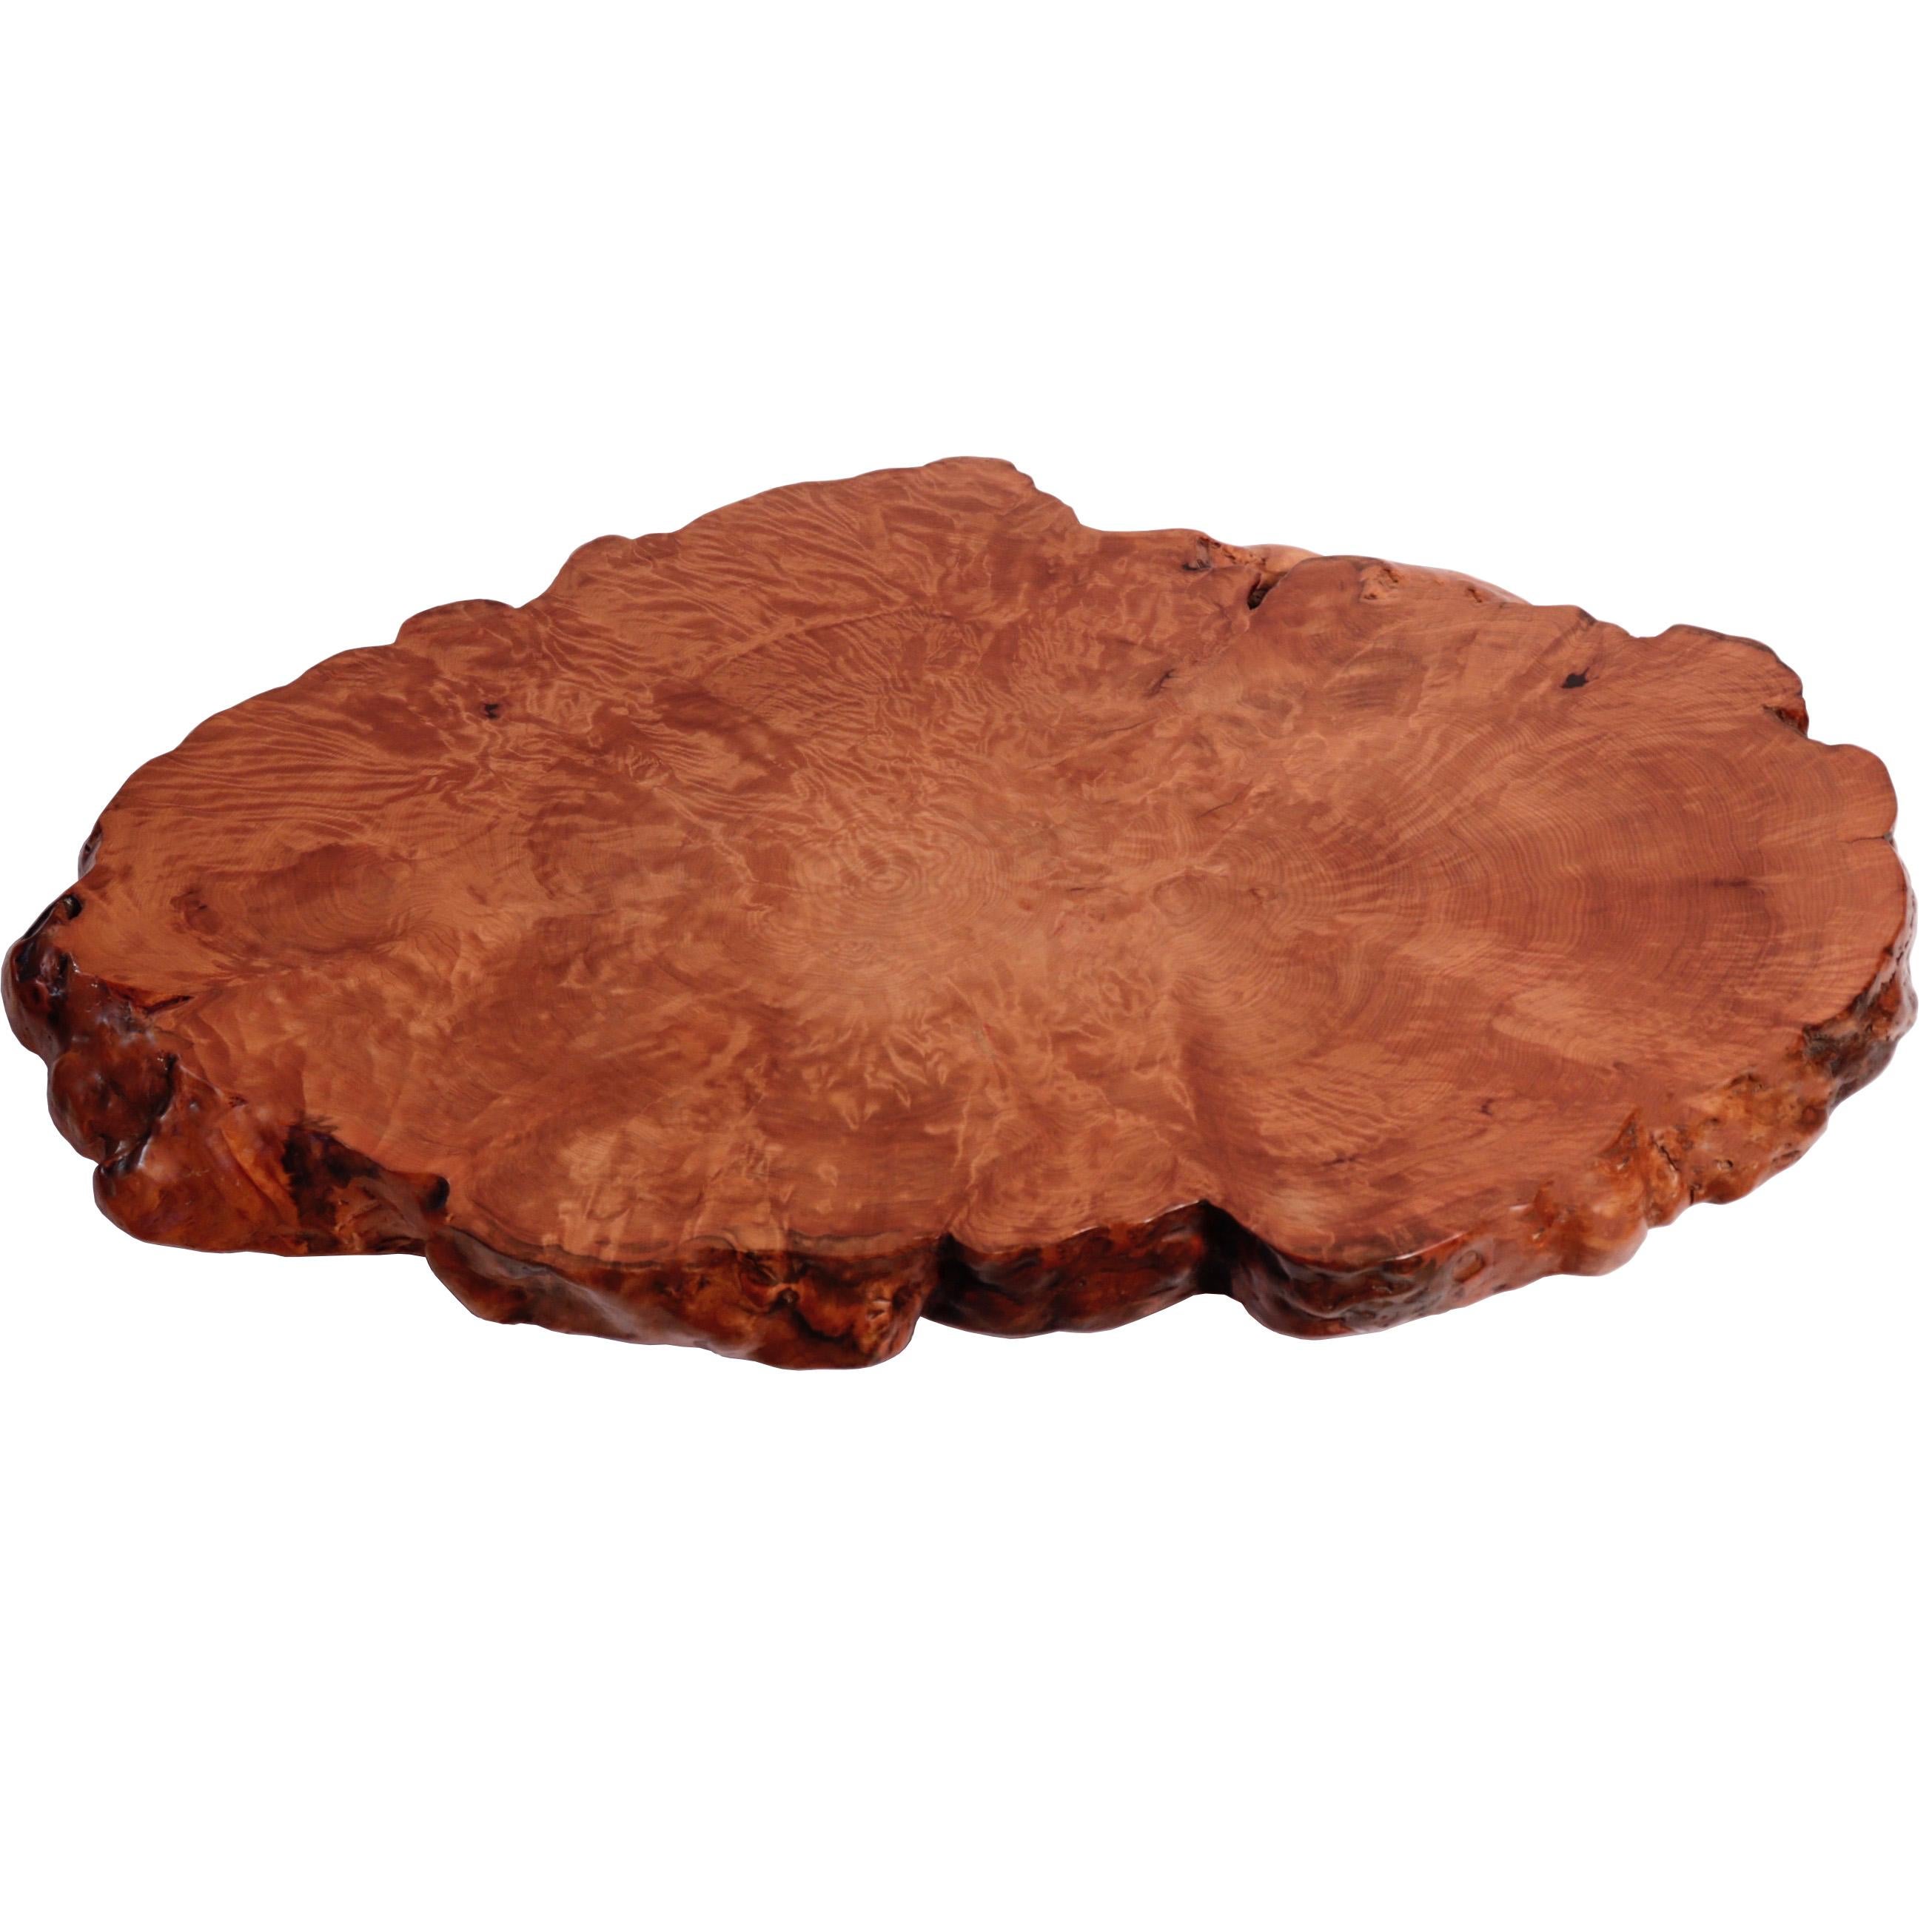 Antique Japanese Burl Wood Display Stand Used as a Lazy Susan In Good Condition For Sale In New York, NY